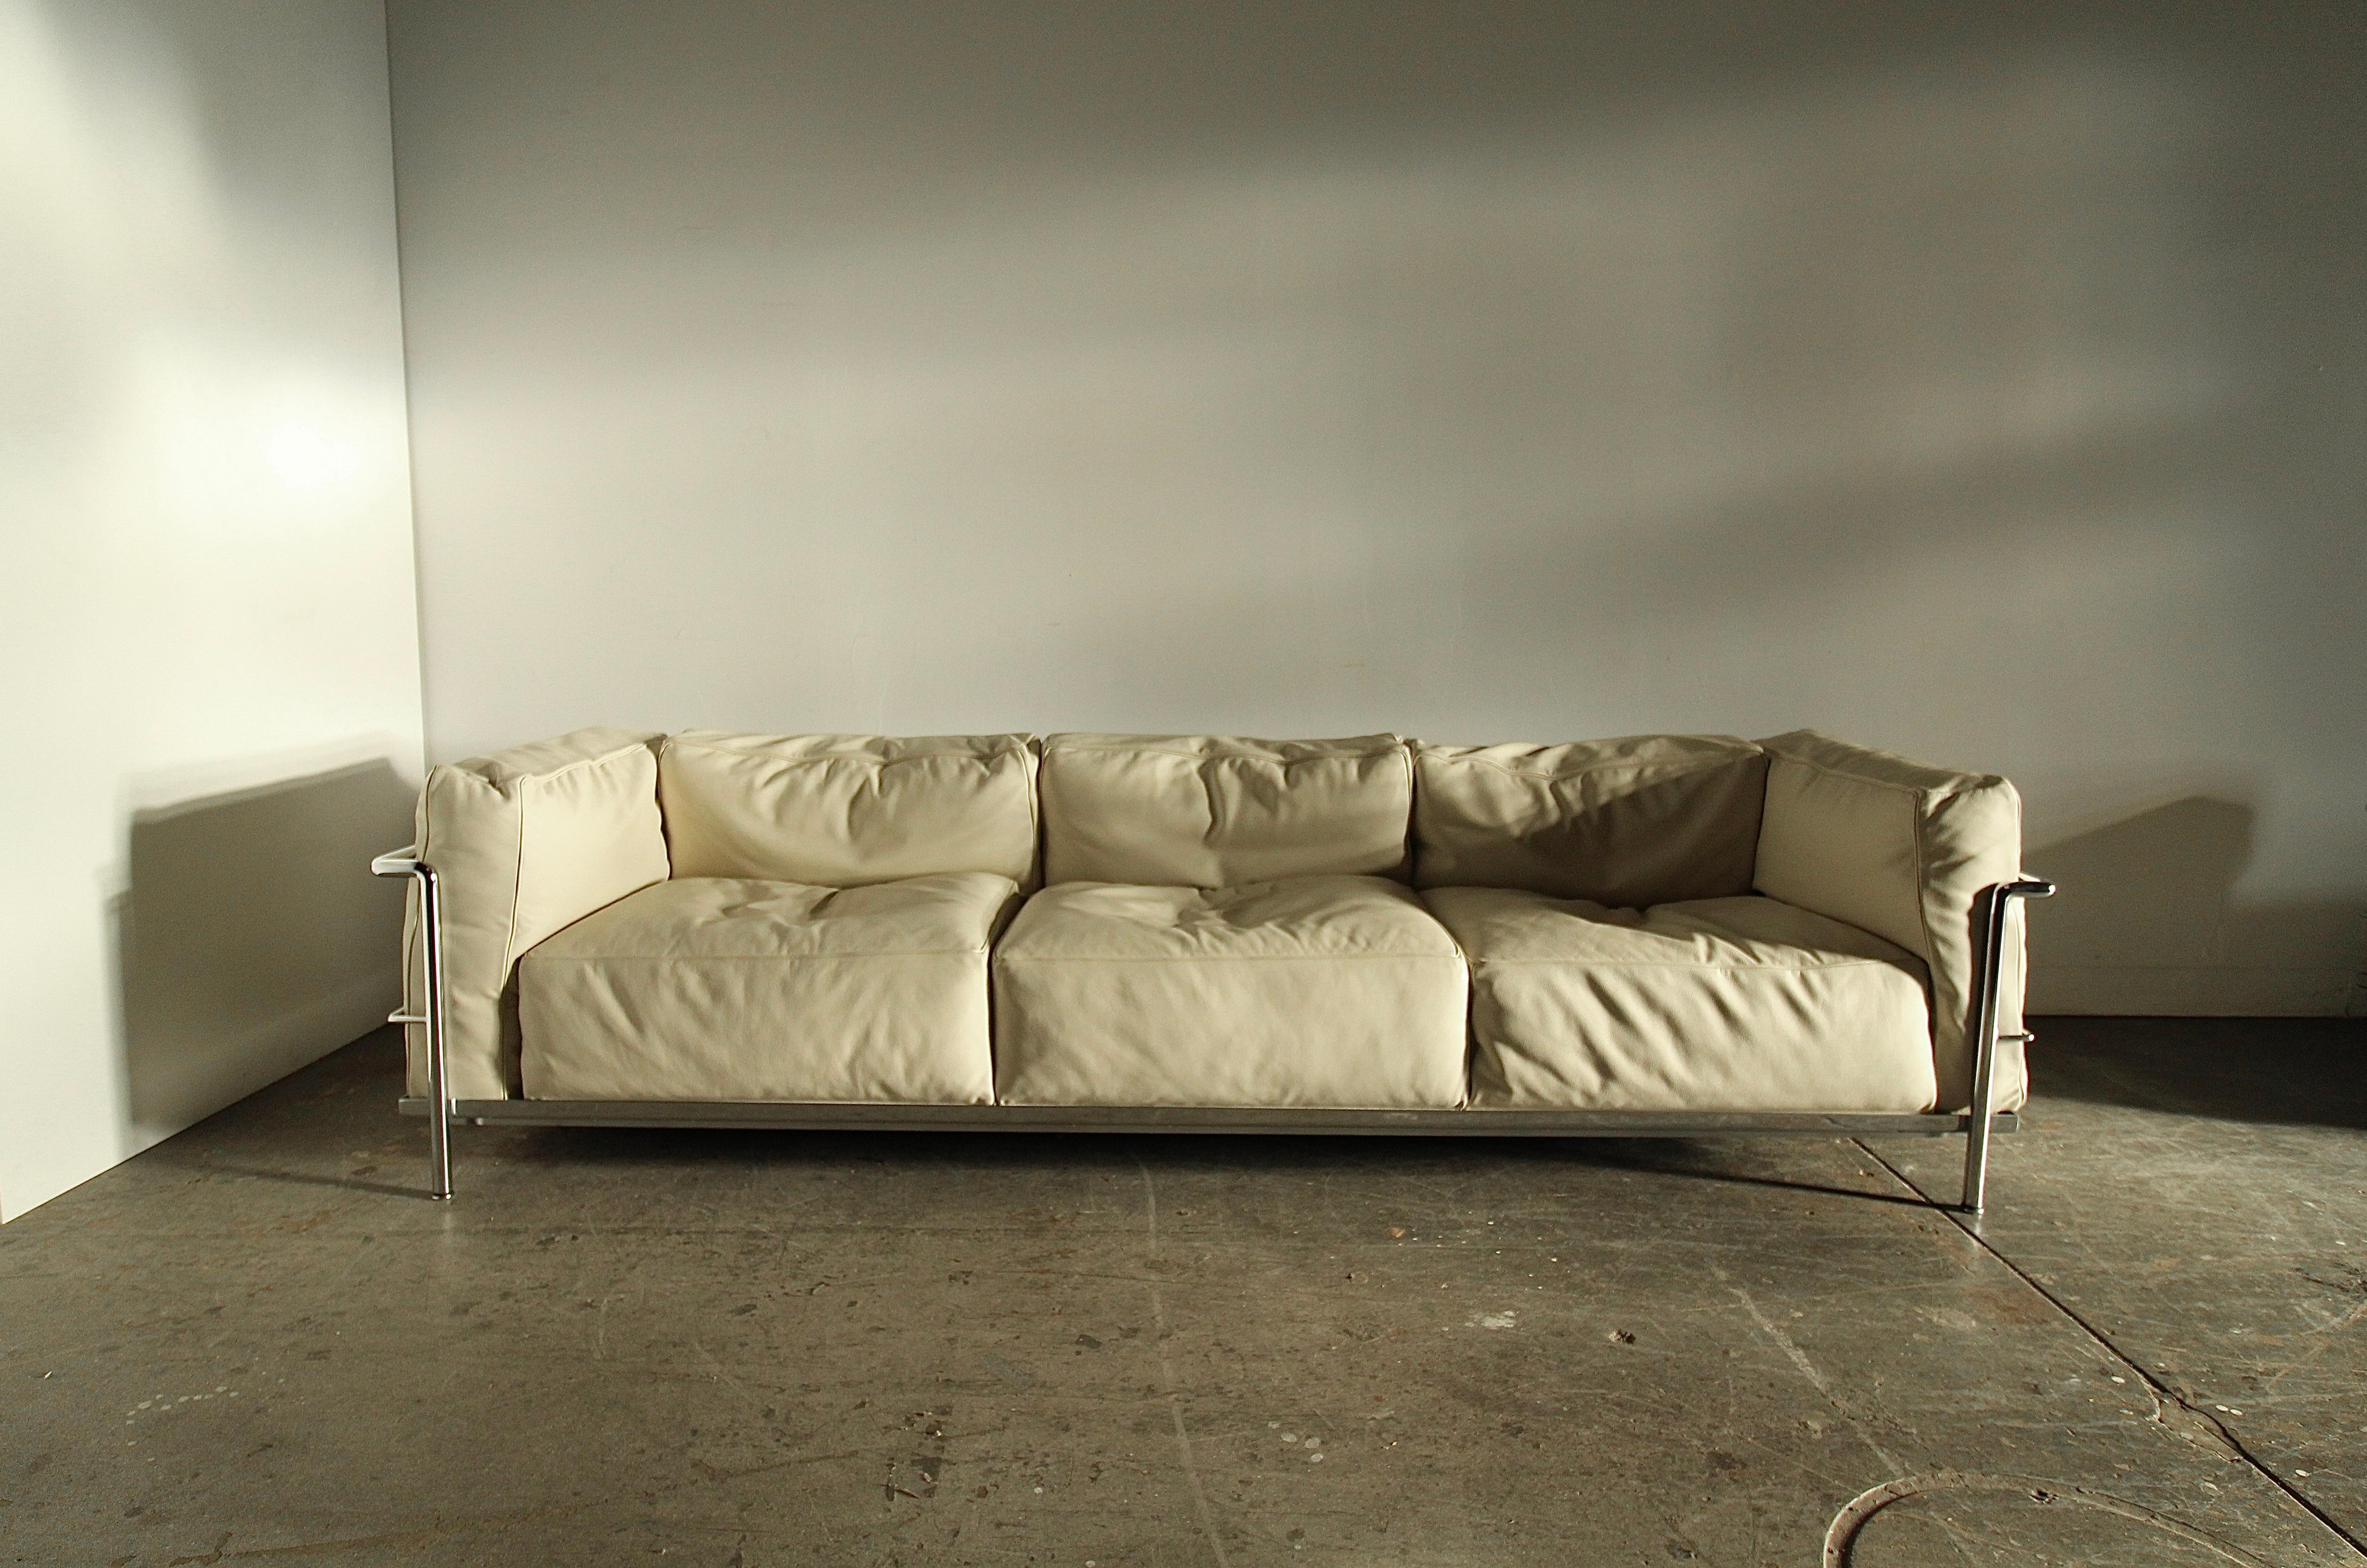 A magnificent and luxurious LC3 Grand Modele sofa by Le Corbusier, Pierre Jeanneret, and Charlotte Perriand for Cassina, circa late 90's. Upholstered in thick, full-grain, leather with 70% feather down cushions for maximum body enveloping comfort